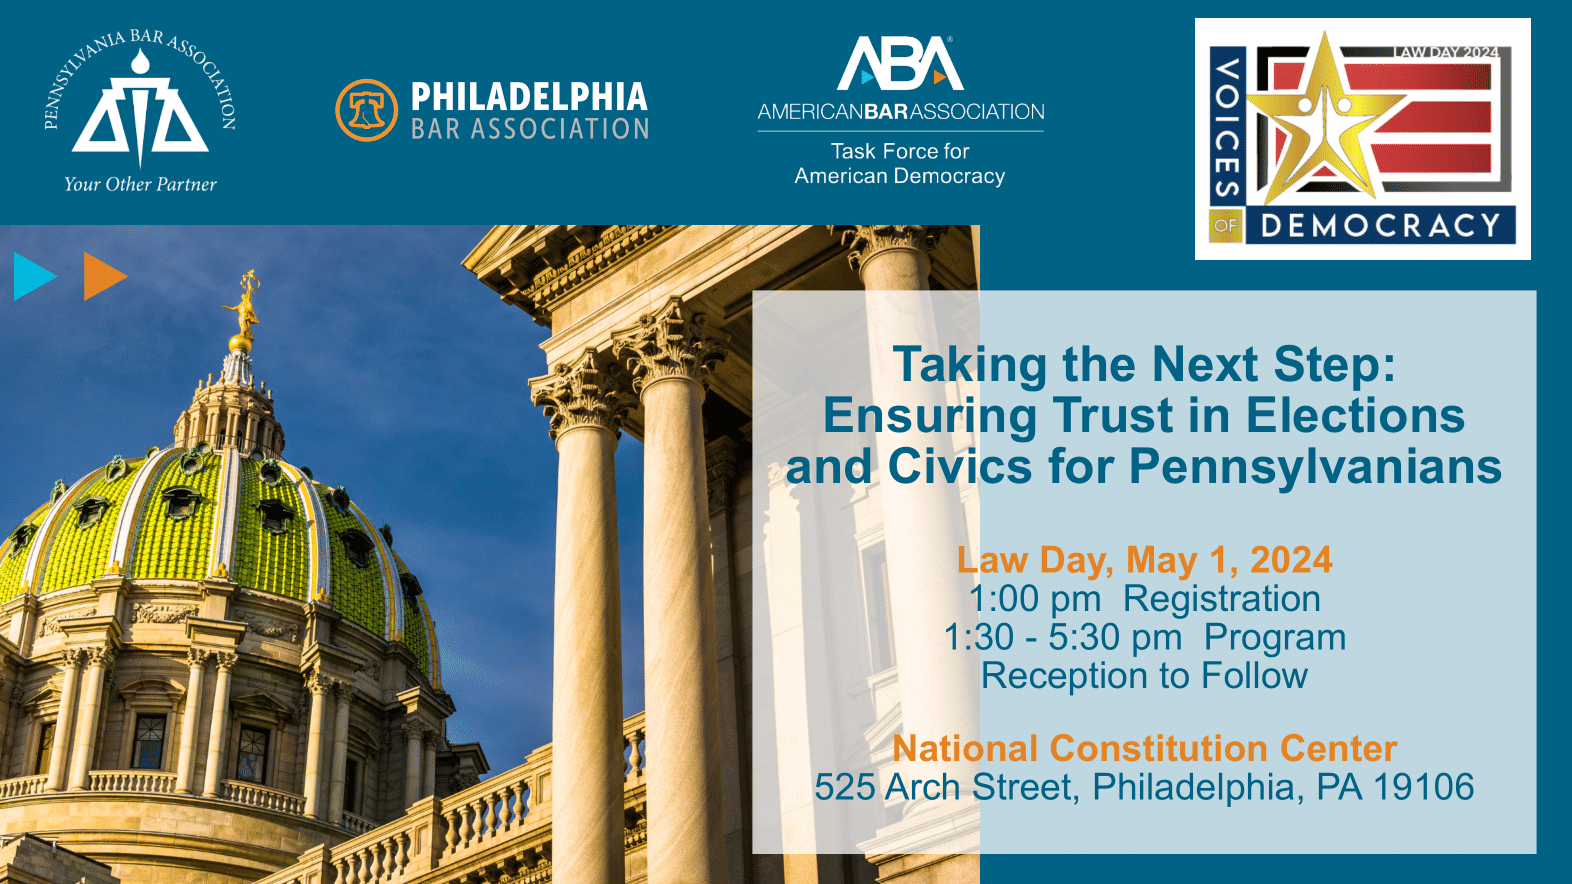 Event Banner - Taking the Next Step: Ensuring Trusted Elections and Civics for Pennsylvanians, May 1, 2024